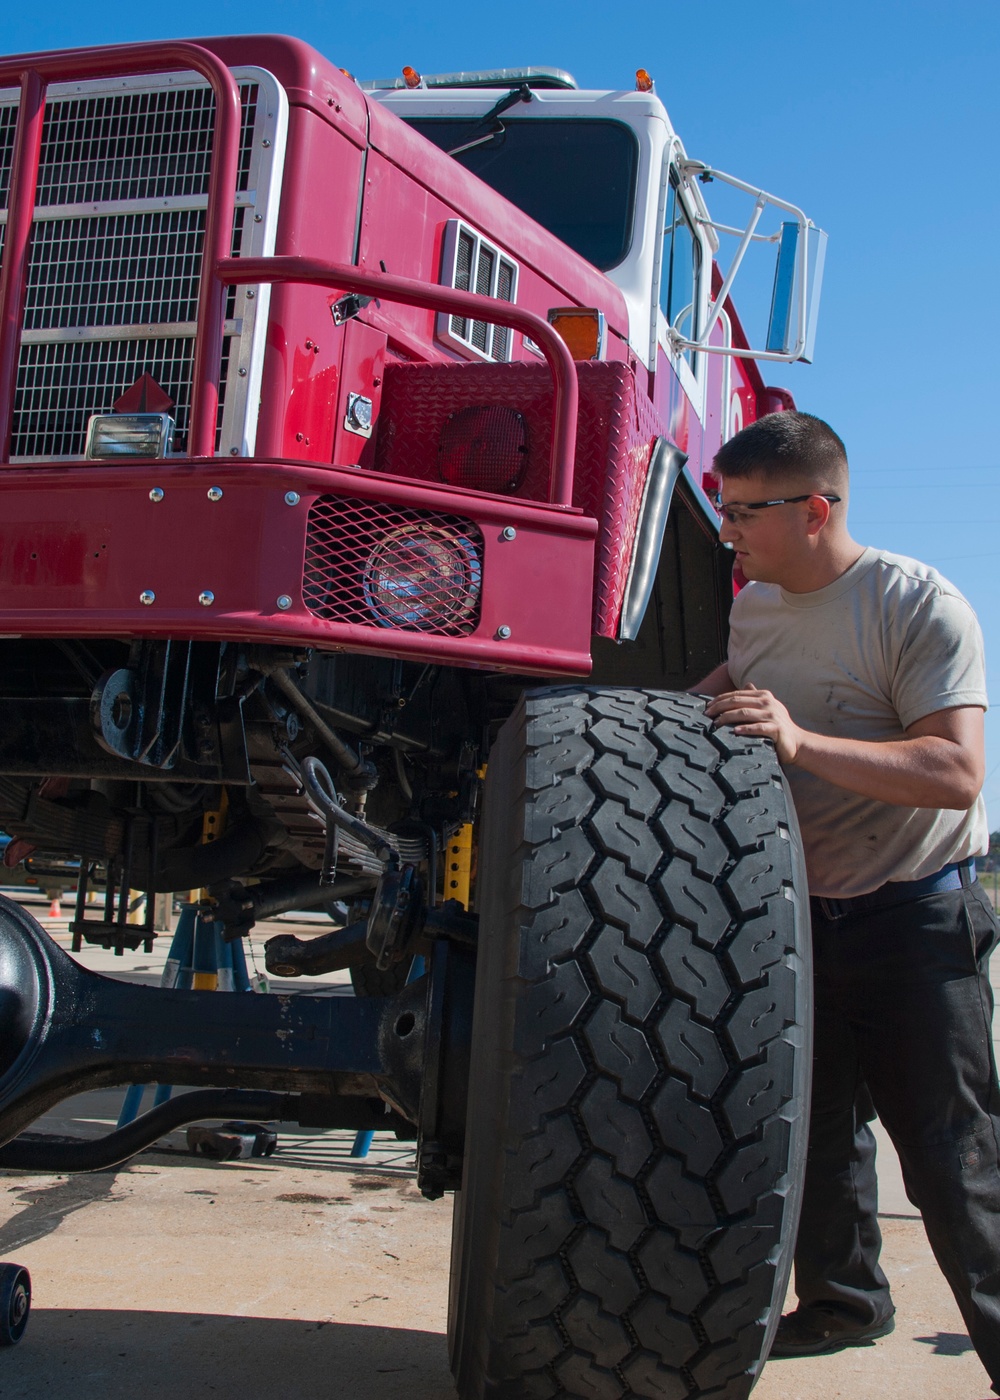 Fire truck repair saves wing thousands, ensures readiness